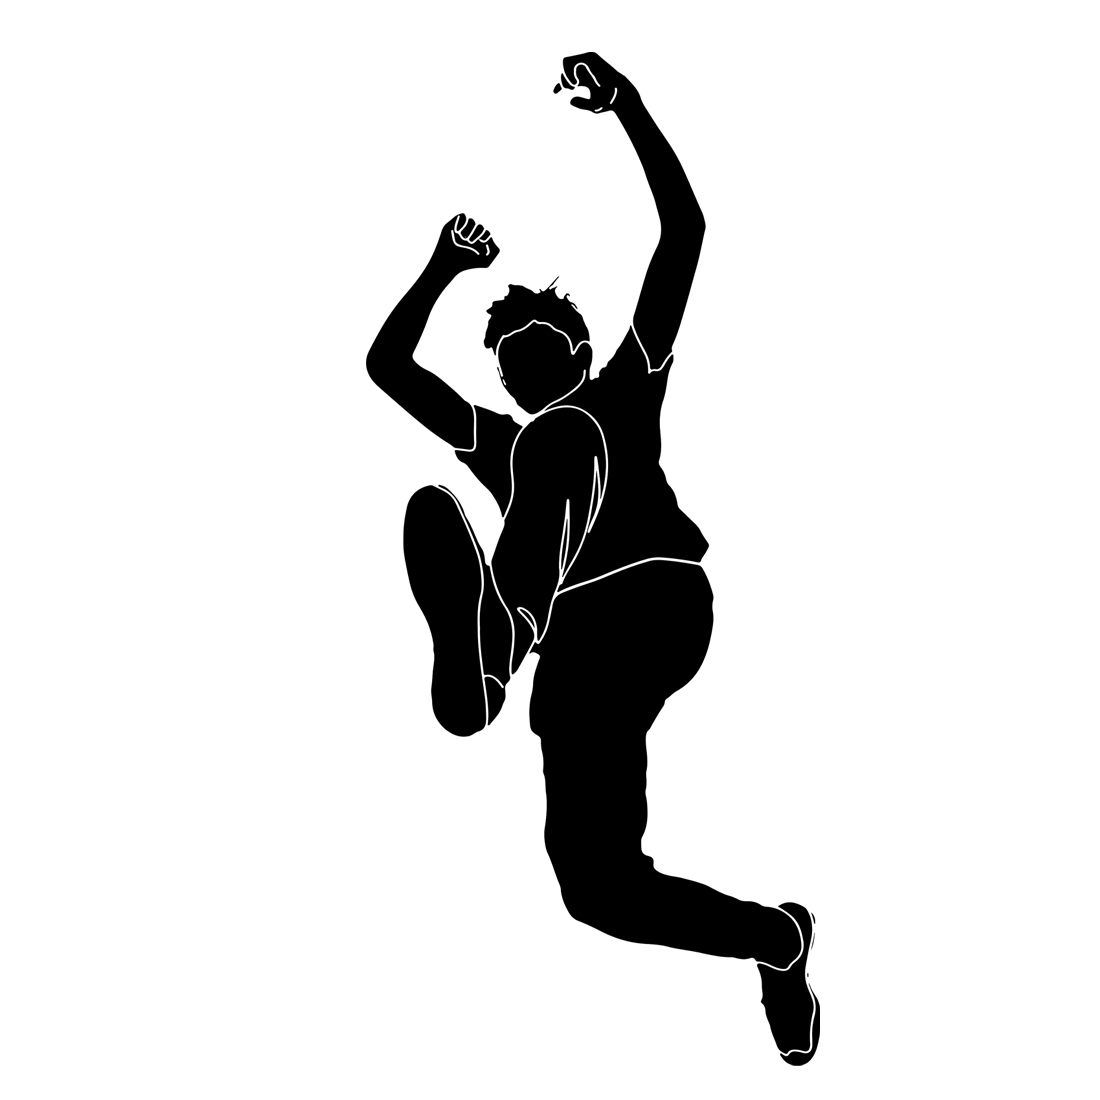 Cartoon Sketch: Young Man Jumping in Air Silhouette from Below, Jump From Below: Dynamic One-Line Illustration of a Leaping Man, Young Man in Mid-Air Jump From Below preview image.